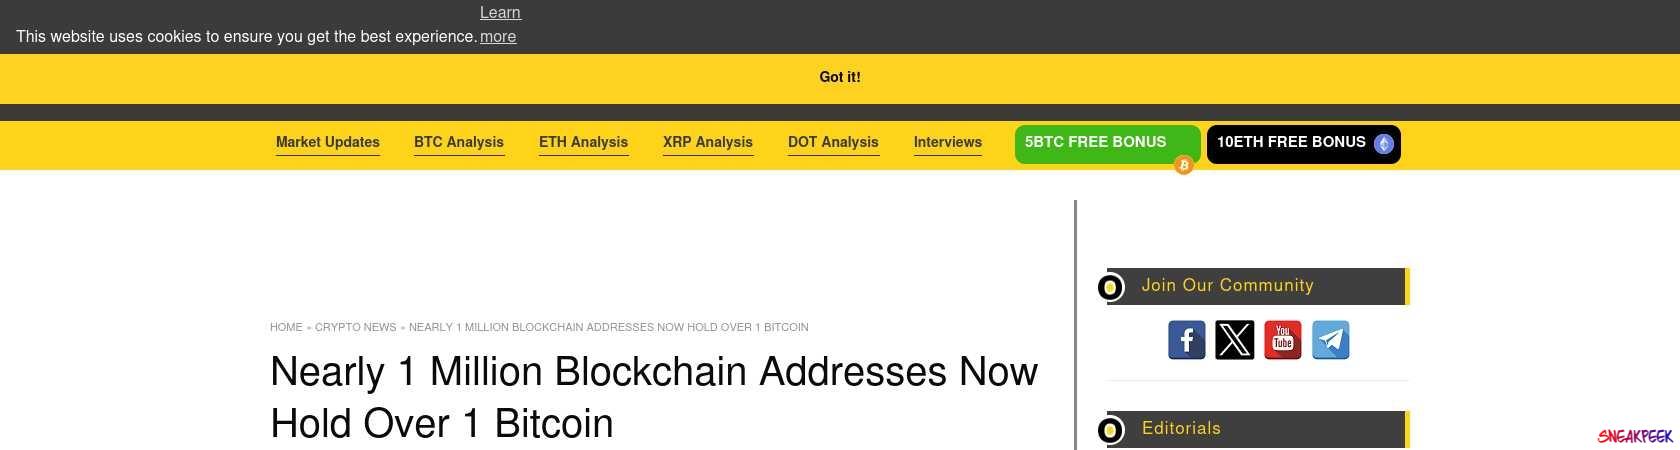 Read the full Article:  ⭲ Nearly 1 Million Blockchain Addresses Now Hold Over 1 Bitcoin